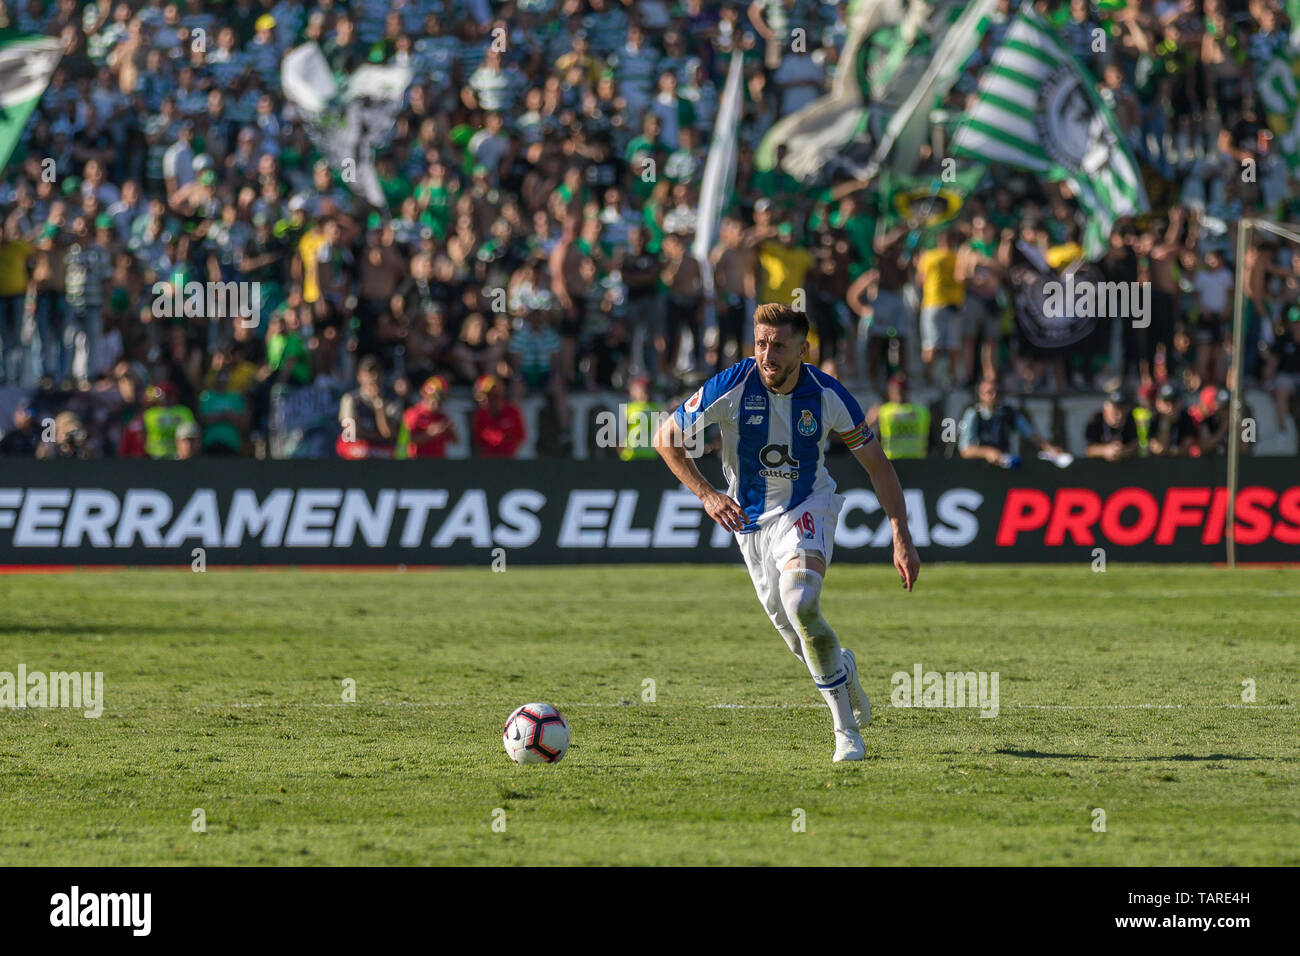 May 25, 2019. Oeiras, Portugal. Porto's midfielder from Mexico Hector Herrera (16) in action during the game Sporting CP vs FC Porto © Alexandre de Sousa/Alamy Live News Stock Photo